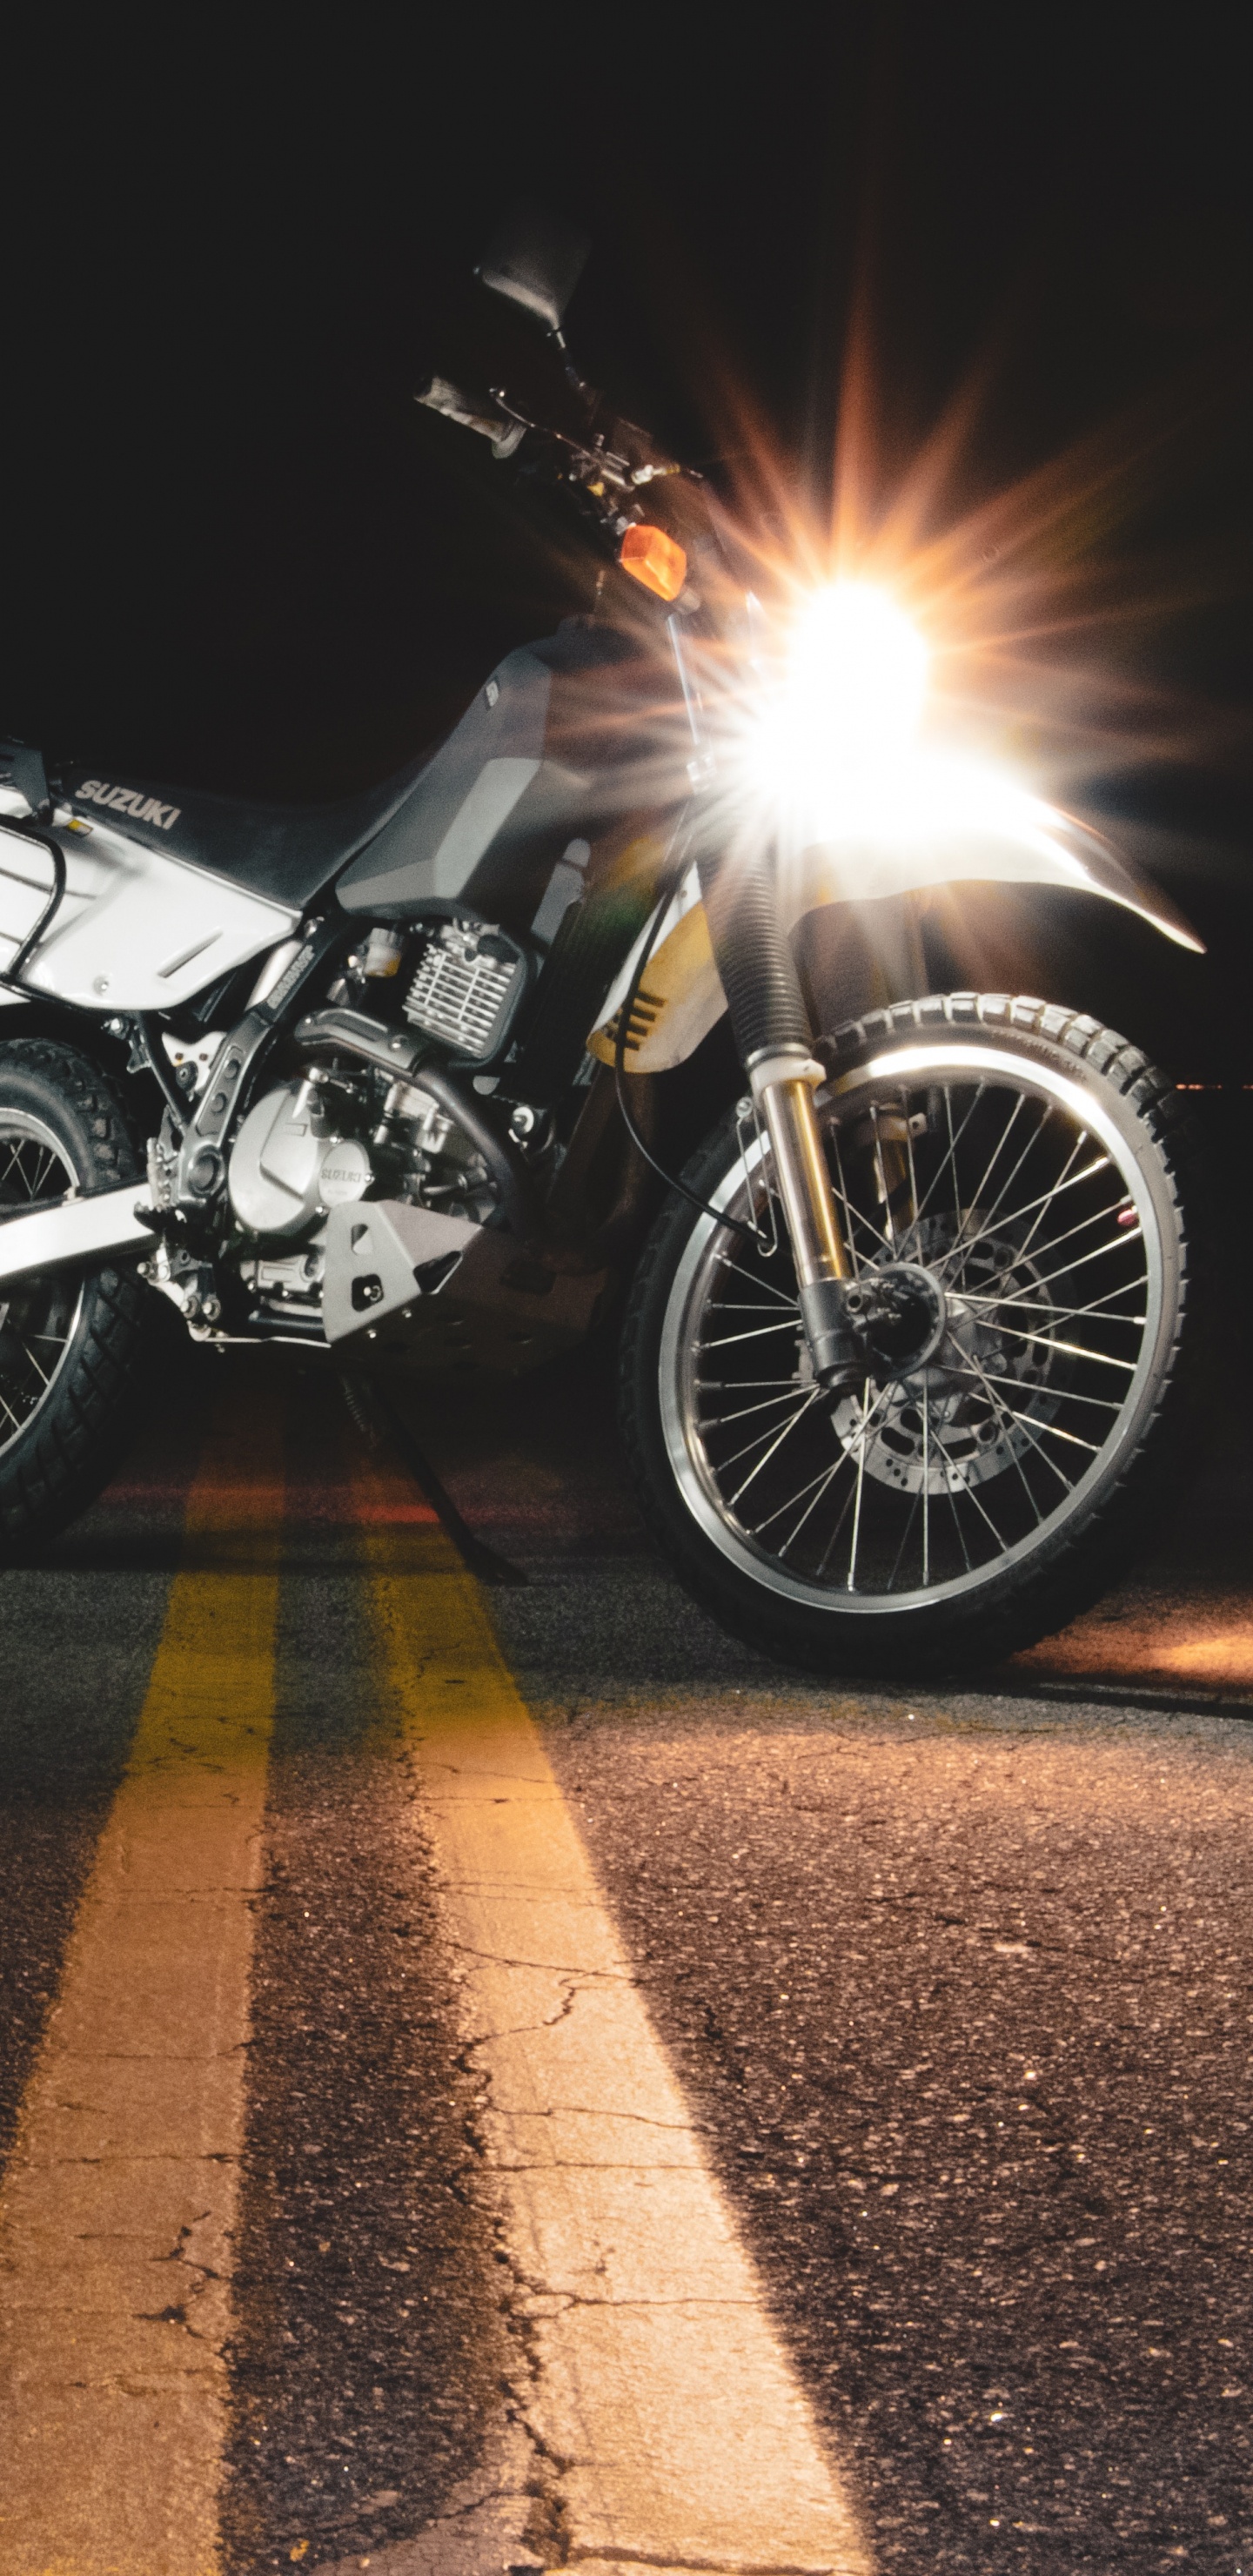 Black and Silver Motorcycle on Road During Night Time. Wallpaper in 1440x2960 Resolution